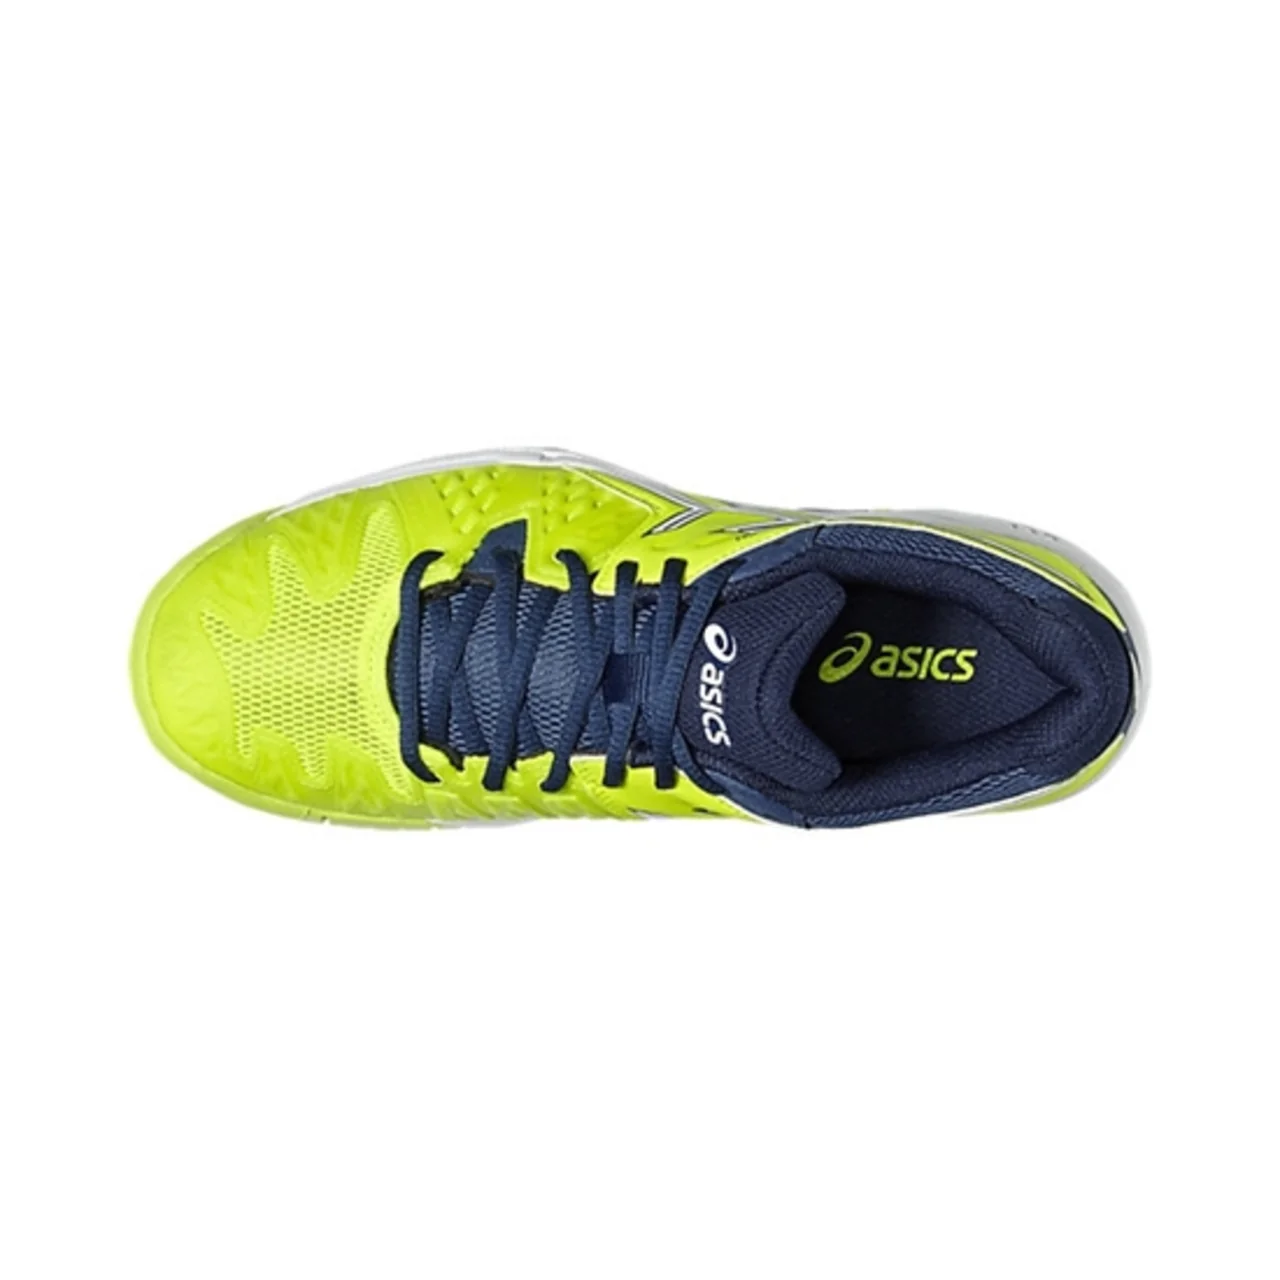 Asics Gel-Resolution GS Safety Yellow